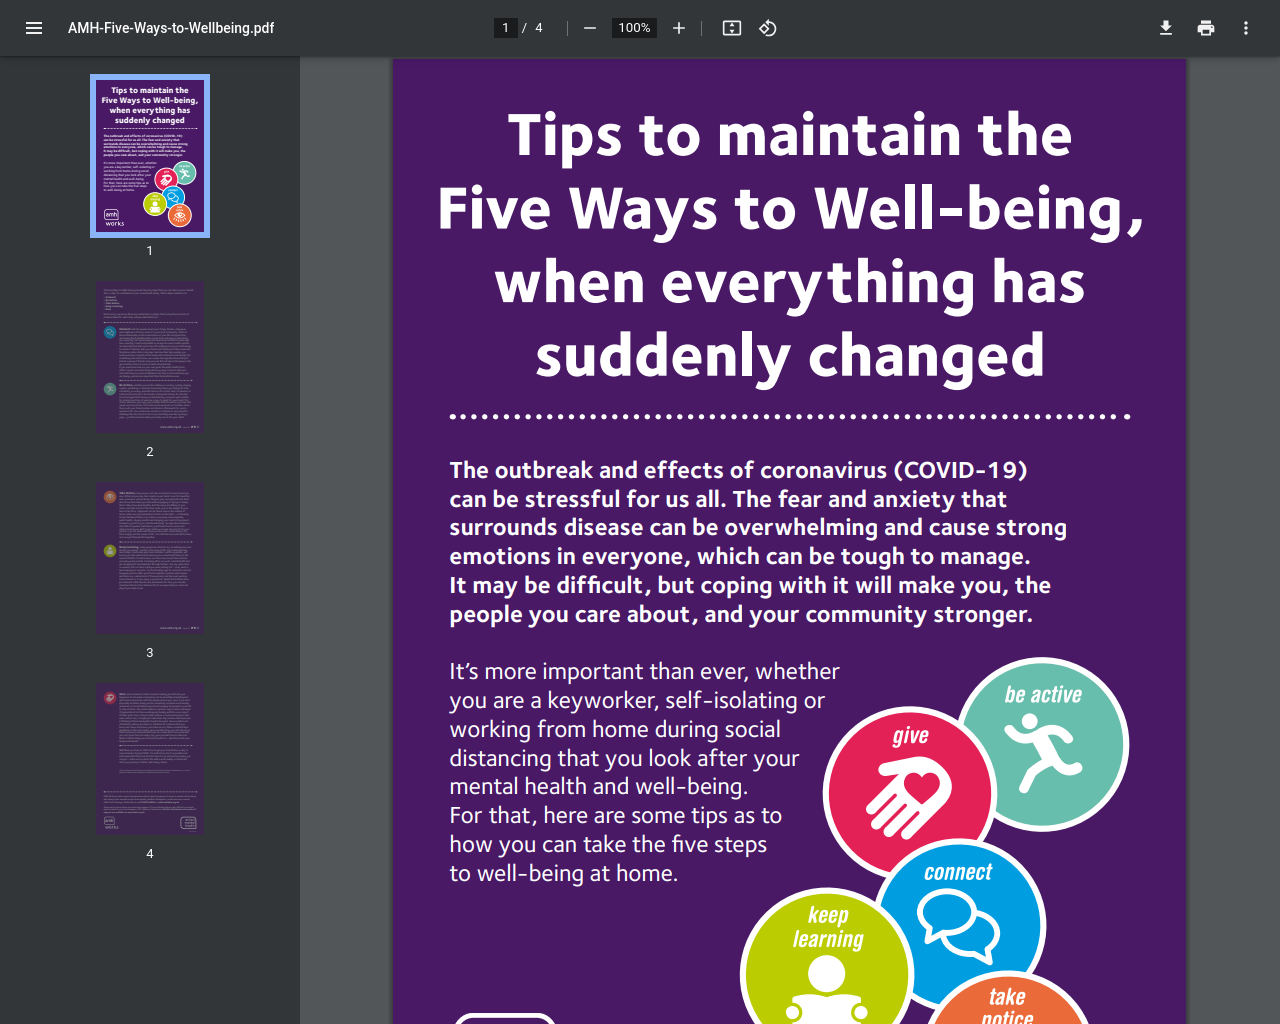 5 ways to Wellbeing